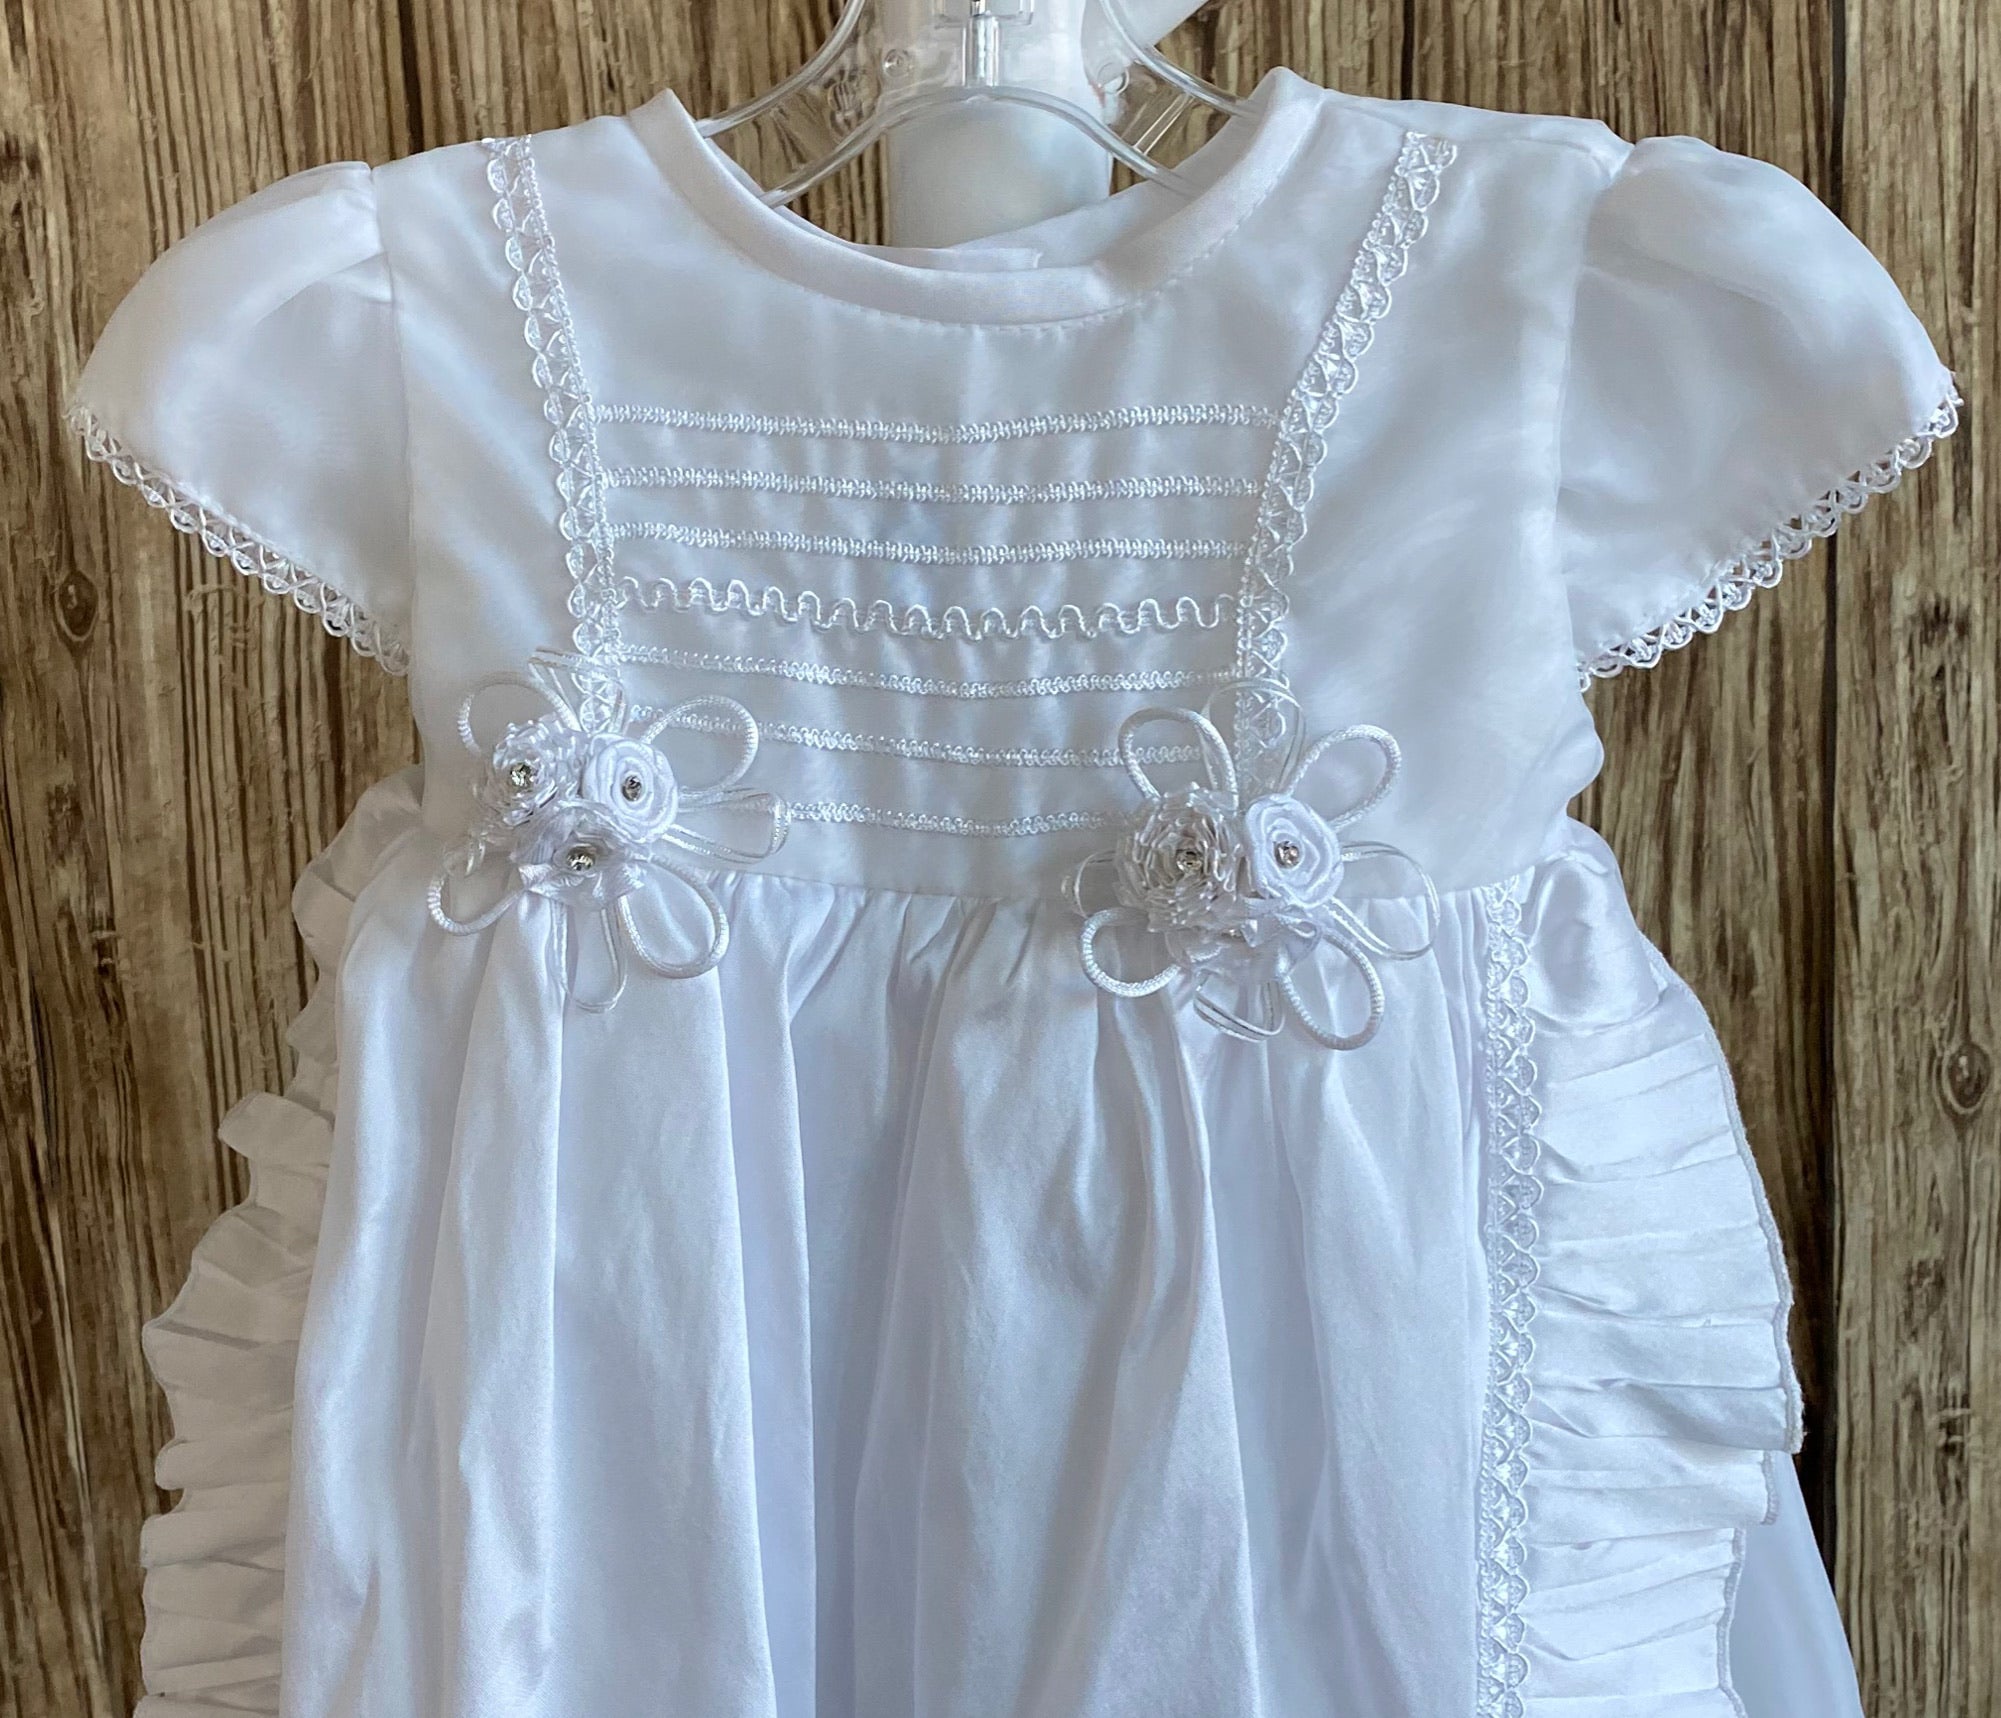 This a beautiful, one-of-a-kind baptism gown.  A lovely gown for a precious child.  White, size 12M Cropped satin bodice Embroidered detailing on bodice Two flowered bouquets on edging of bodice Satin cap sleeve with hand stitching along edge Long layered skirting Embroidered striping detailing on top layer of skirt Ruffled edge along skirt layers Satin bonnet with hand stitched edging Ribbon closure to tie around the head